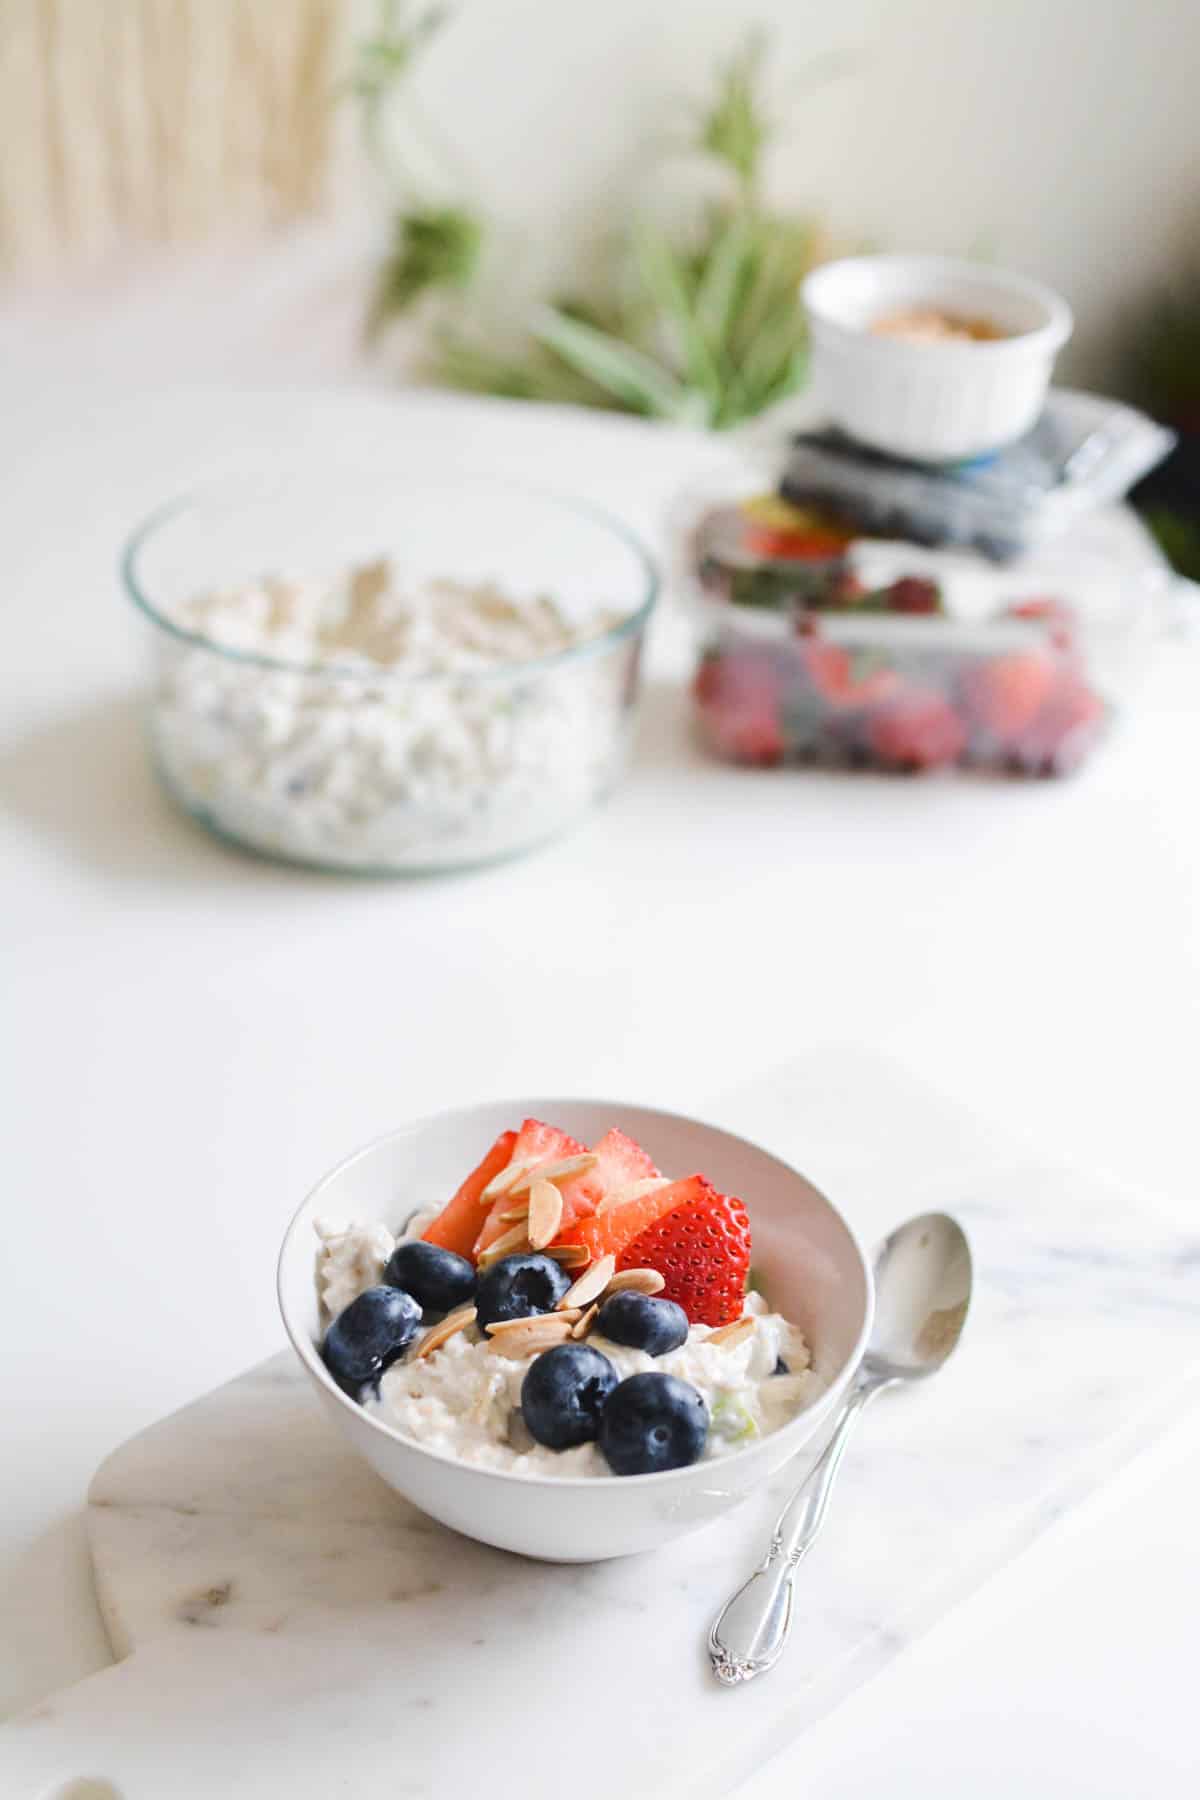 A bowl of cold oatmeal topped with fresh berries with and almonds.